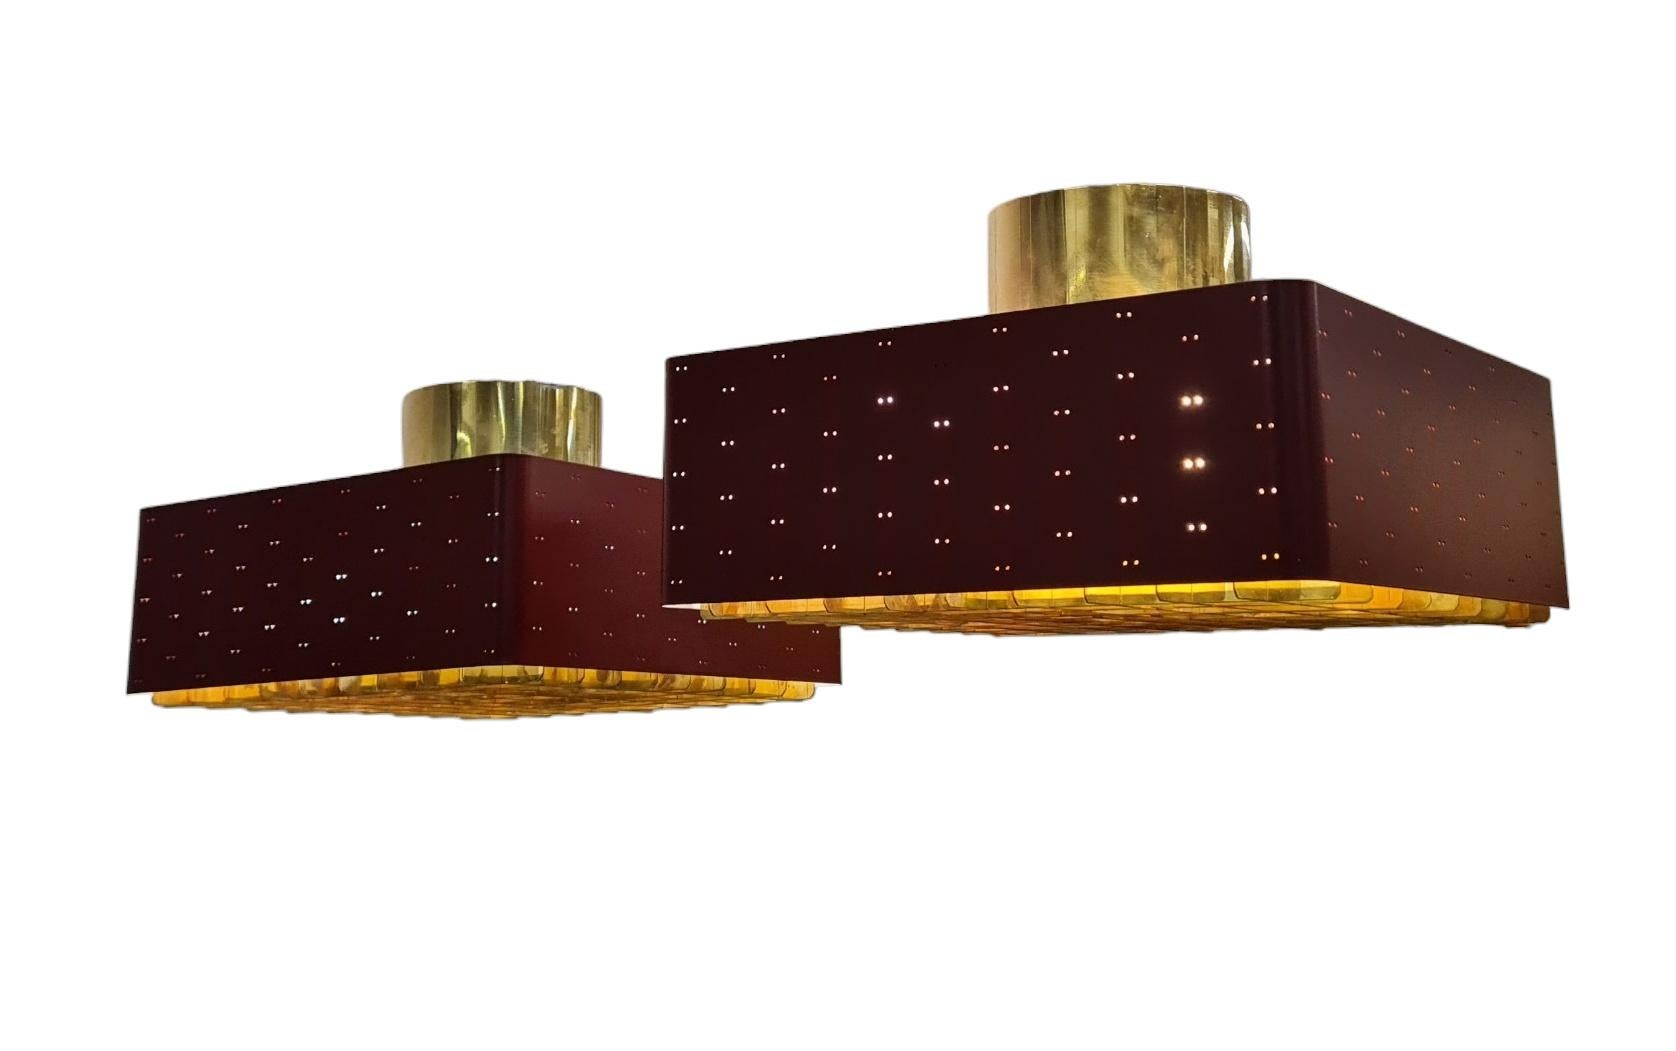 The Starry Sky is one of the most iconic designs of Paavo Tynell's lamps. It was made by both Taito and Idman in many different sizes. The way the light filters through the grill and the holes on the sides makes the ceiling look like a starry sky.